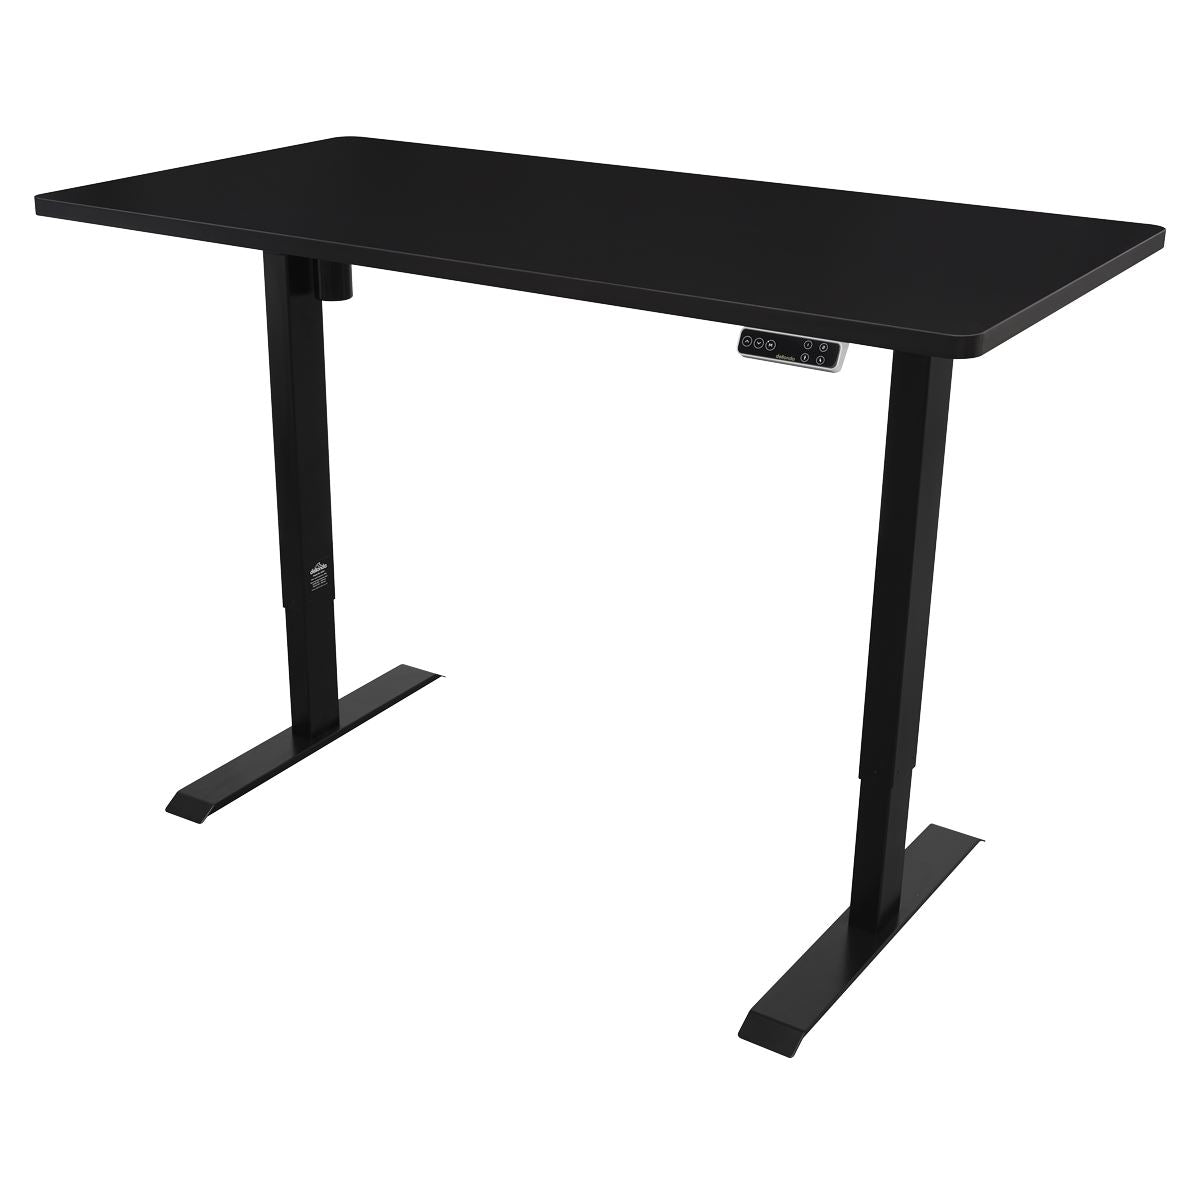 Dellonda Black Electric Height Adjustable Standing Desk with Memory, Quiet, 1400x700mm